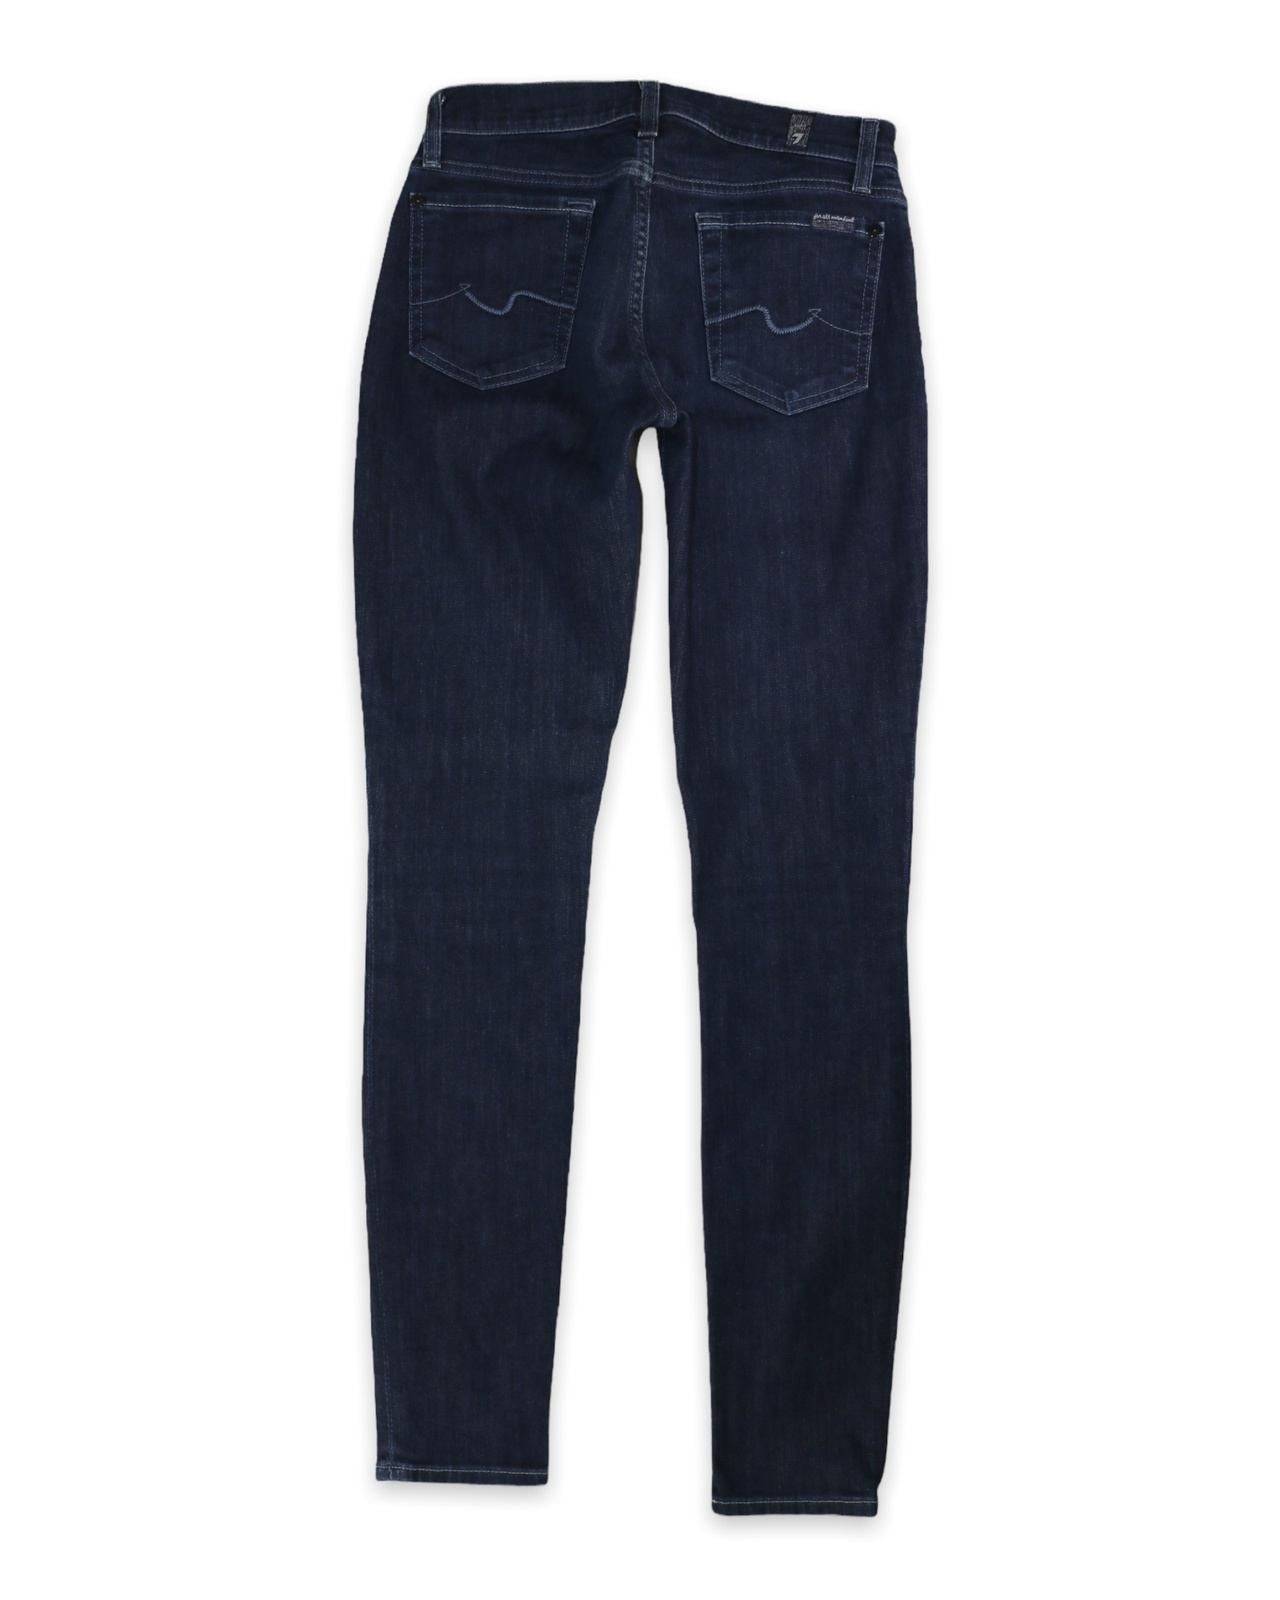 Skinny Jeans 7 for all mankind t. XS